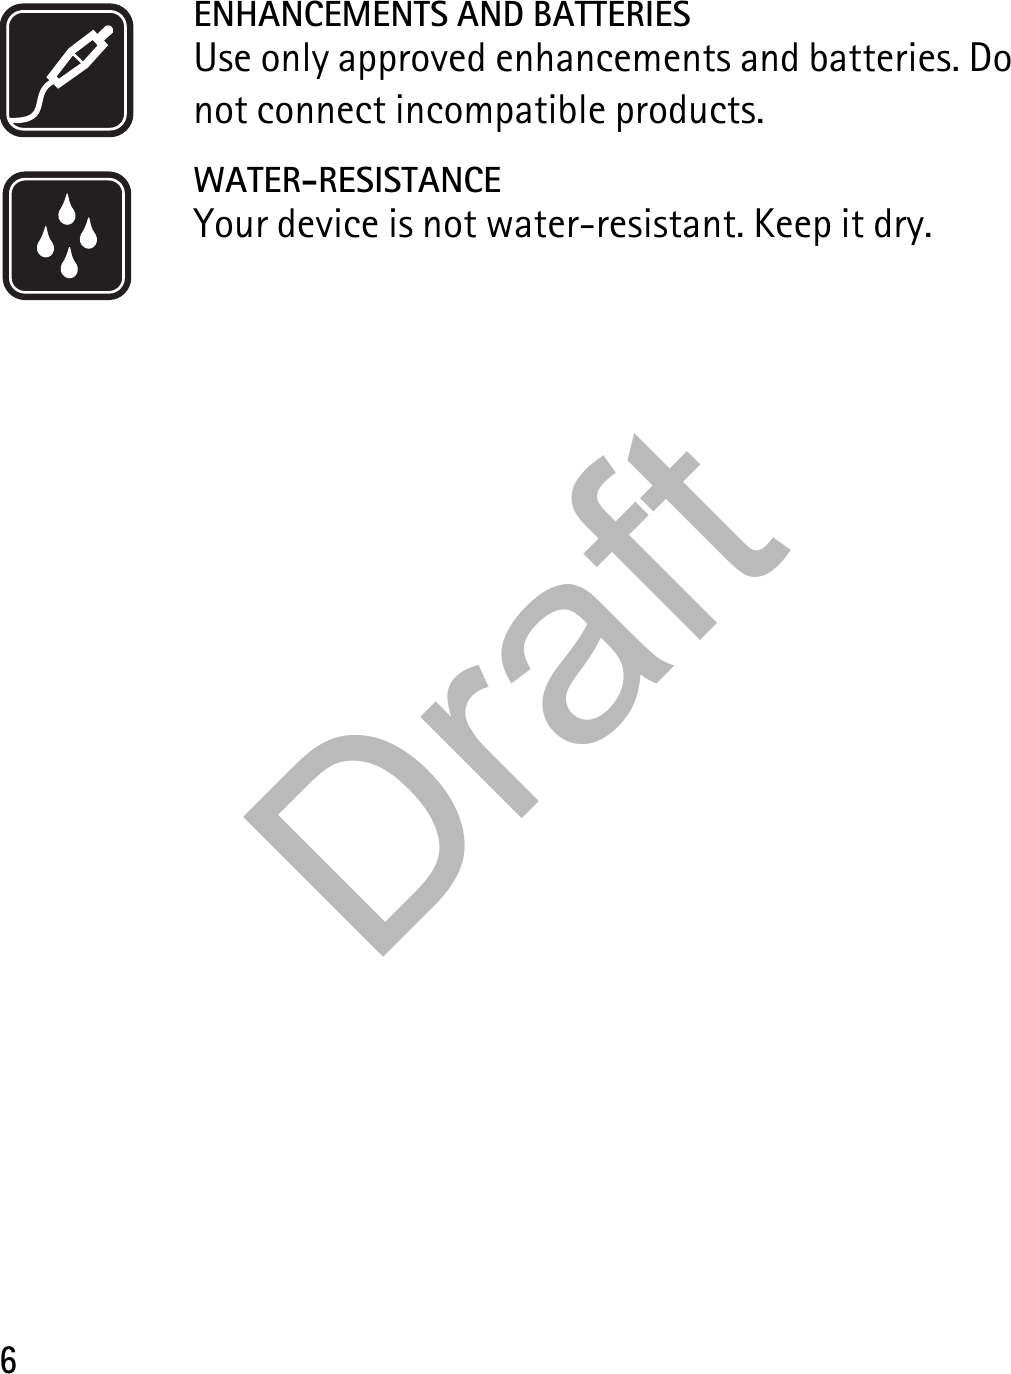 6ENHANCEMENTS AND BATTERIESUse only approved enhancements and batteries. Do not connect incompatible products.WATER-RESISTANCEYour device is not water-resistant. Keep it dry.Draft